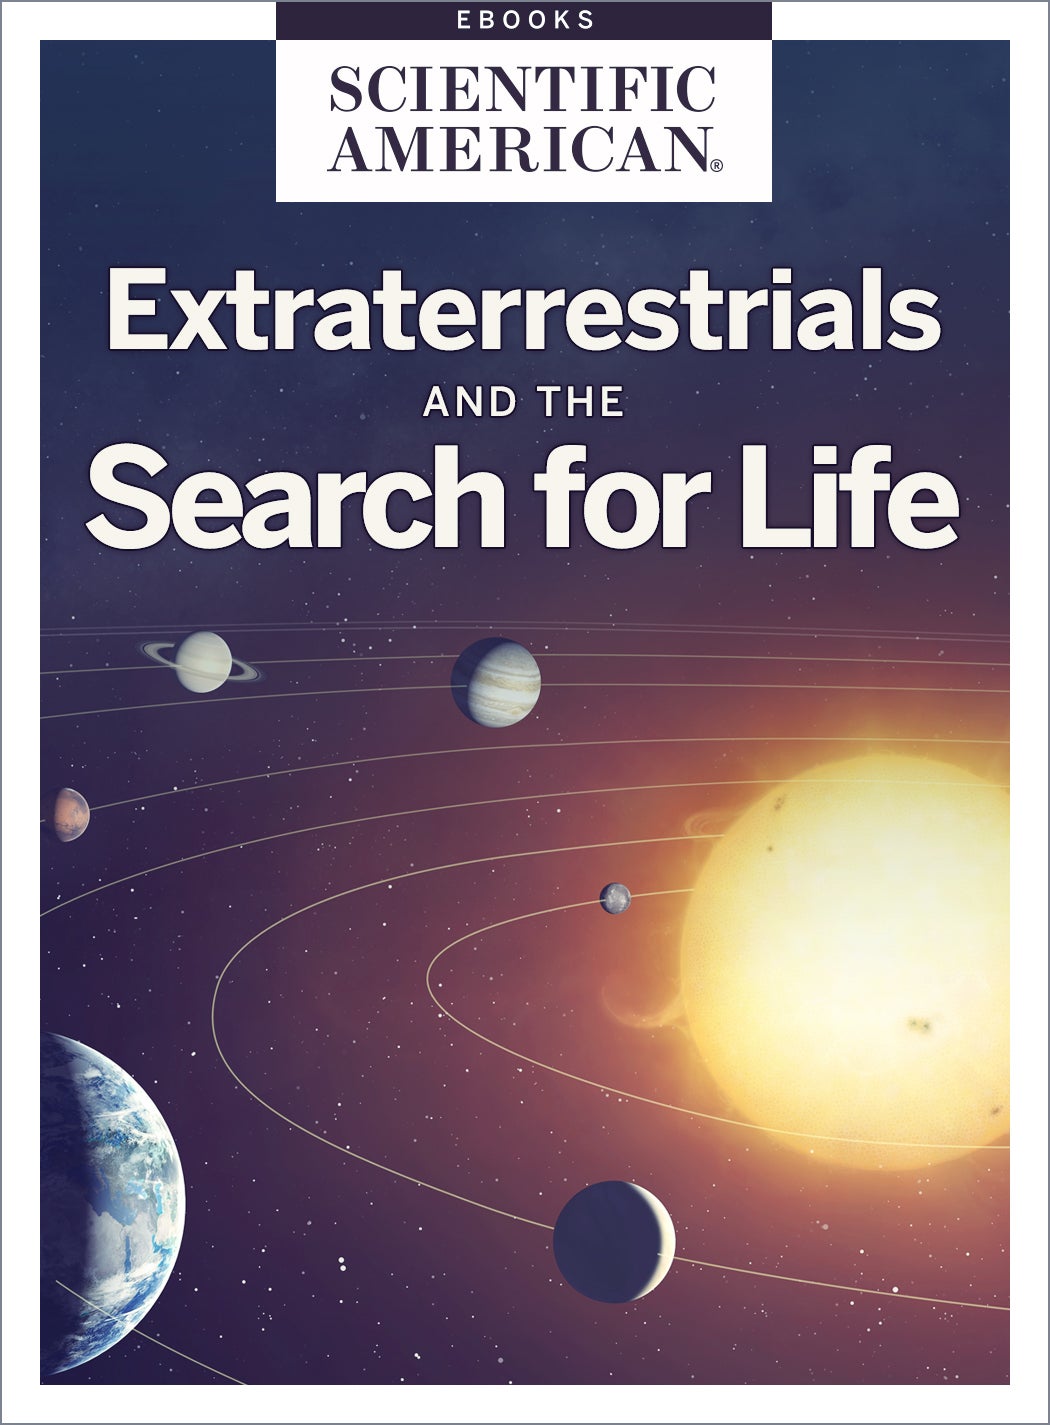 Extraterrestrials and the Search for Life